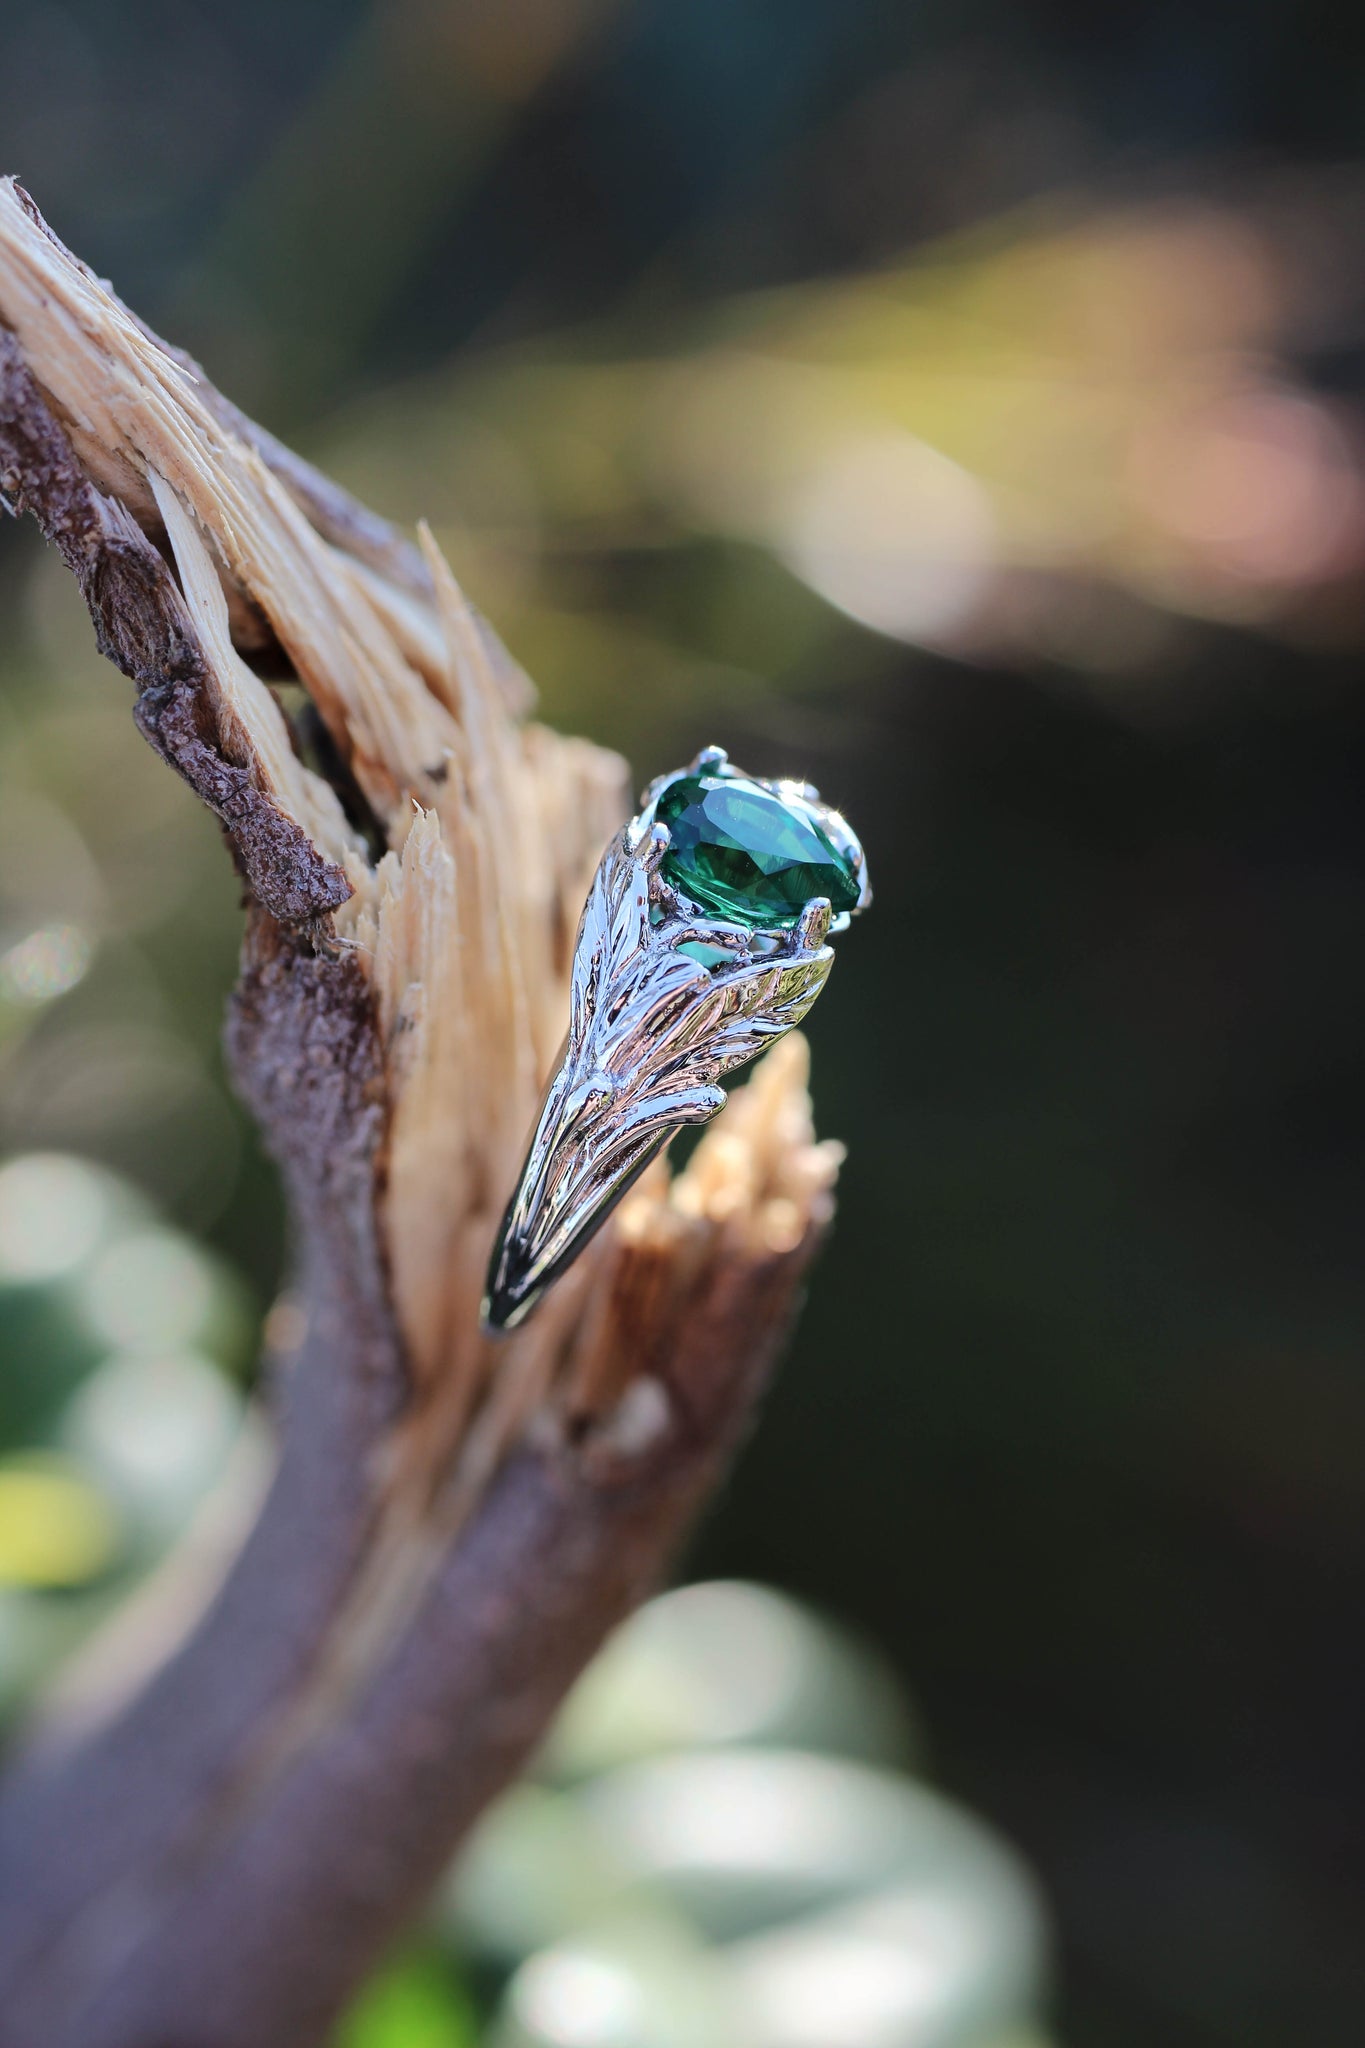 Pear cut emerald ring, leaves engagement ring / Wisteria - Eden Garden Jewelry™